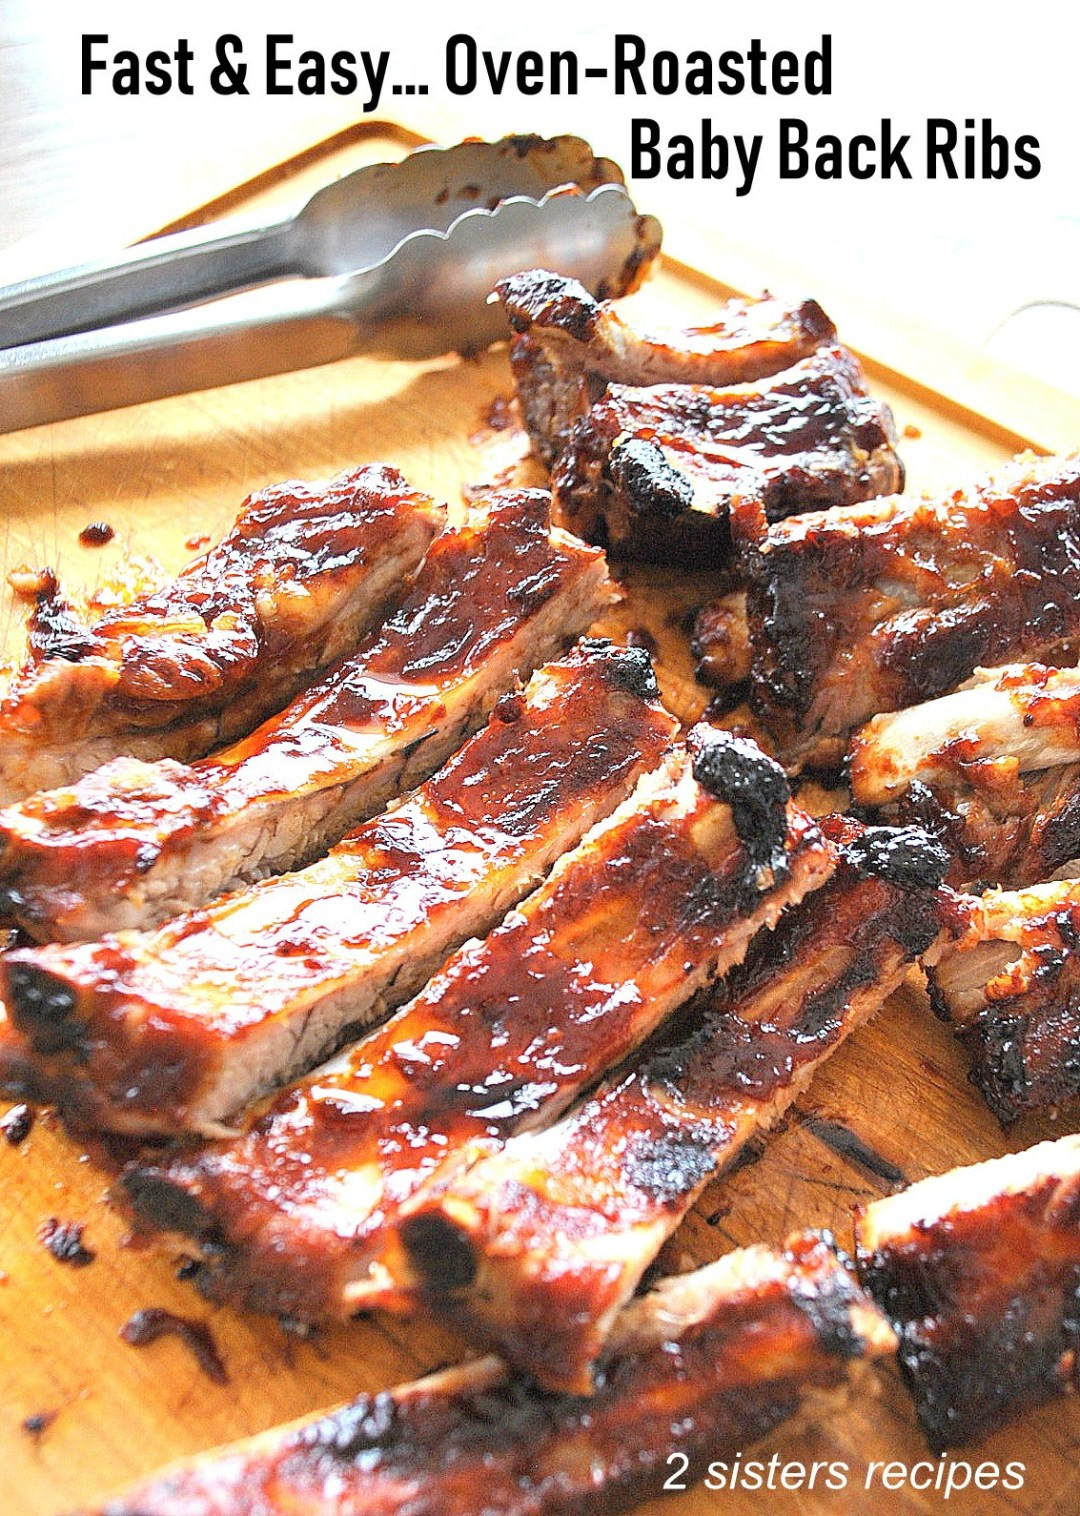 Pork Baby Back Ribs Oven
 Fast & Easy Oven Roasted Baby Back Ribs 2 Sisters